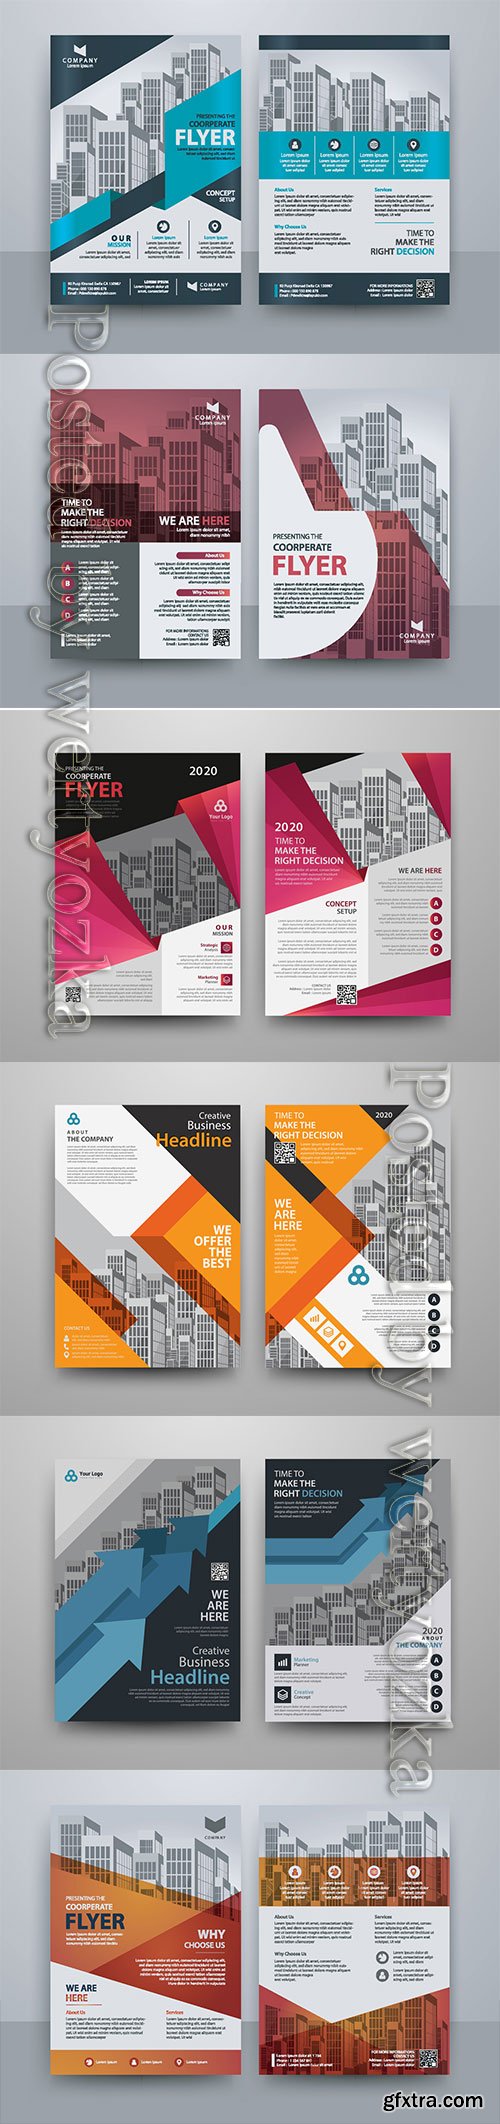 Business vector template for brochure, annual report, magazine # 14